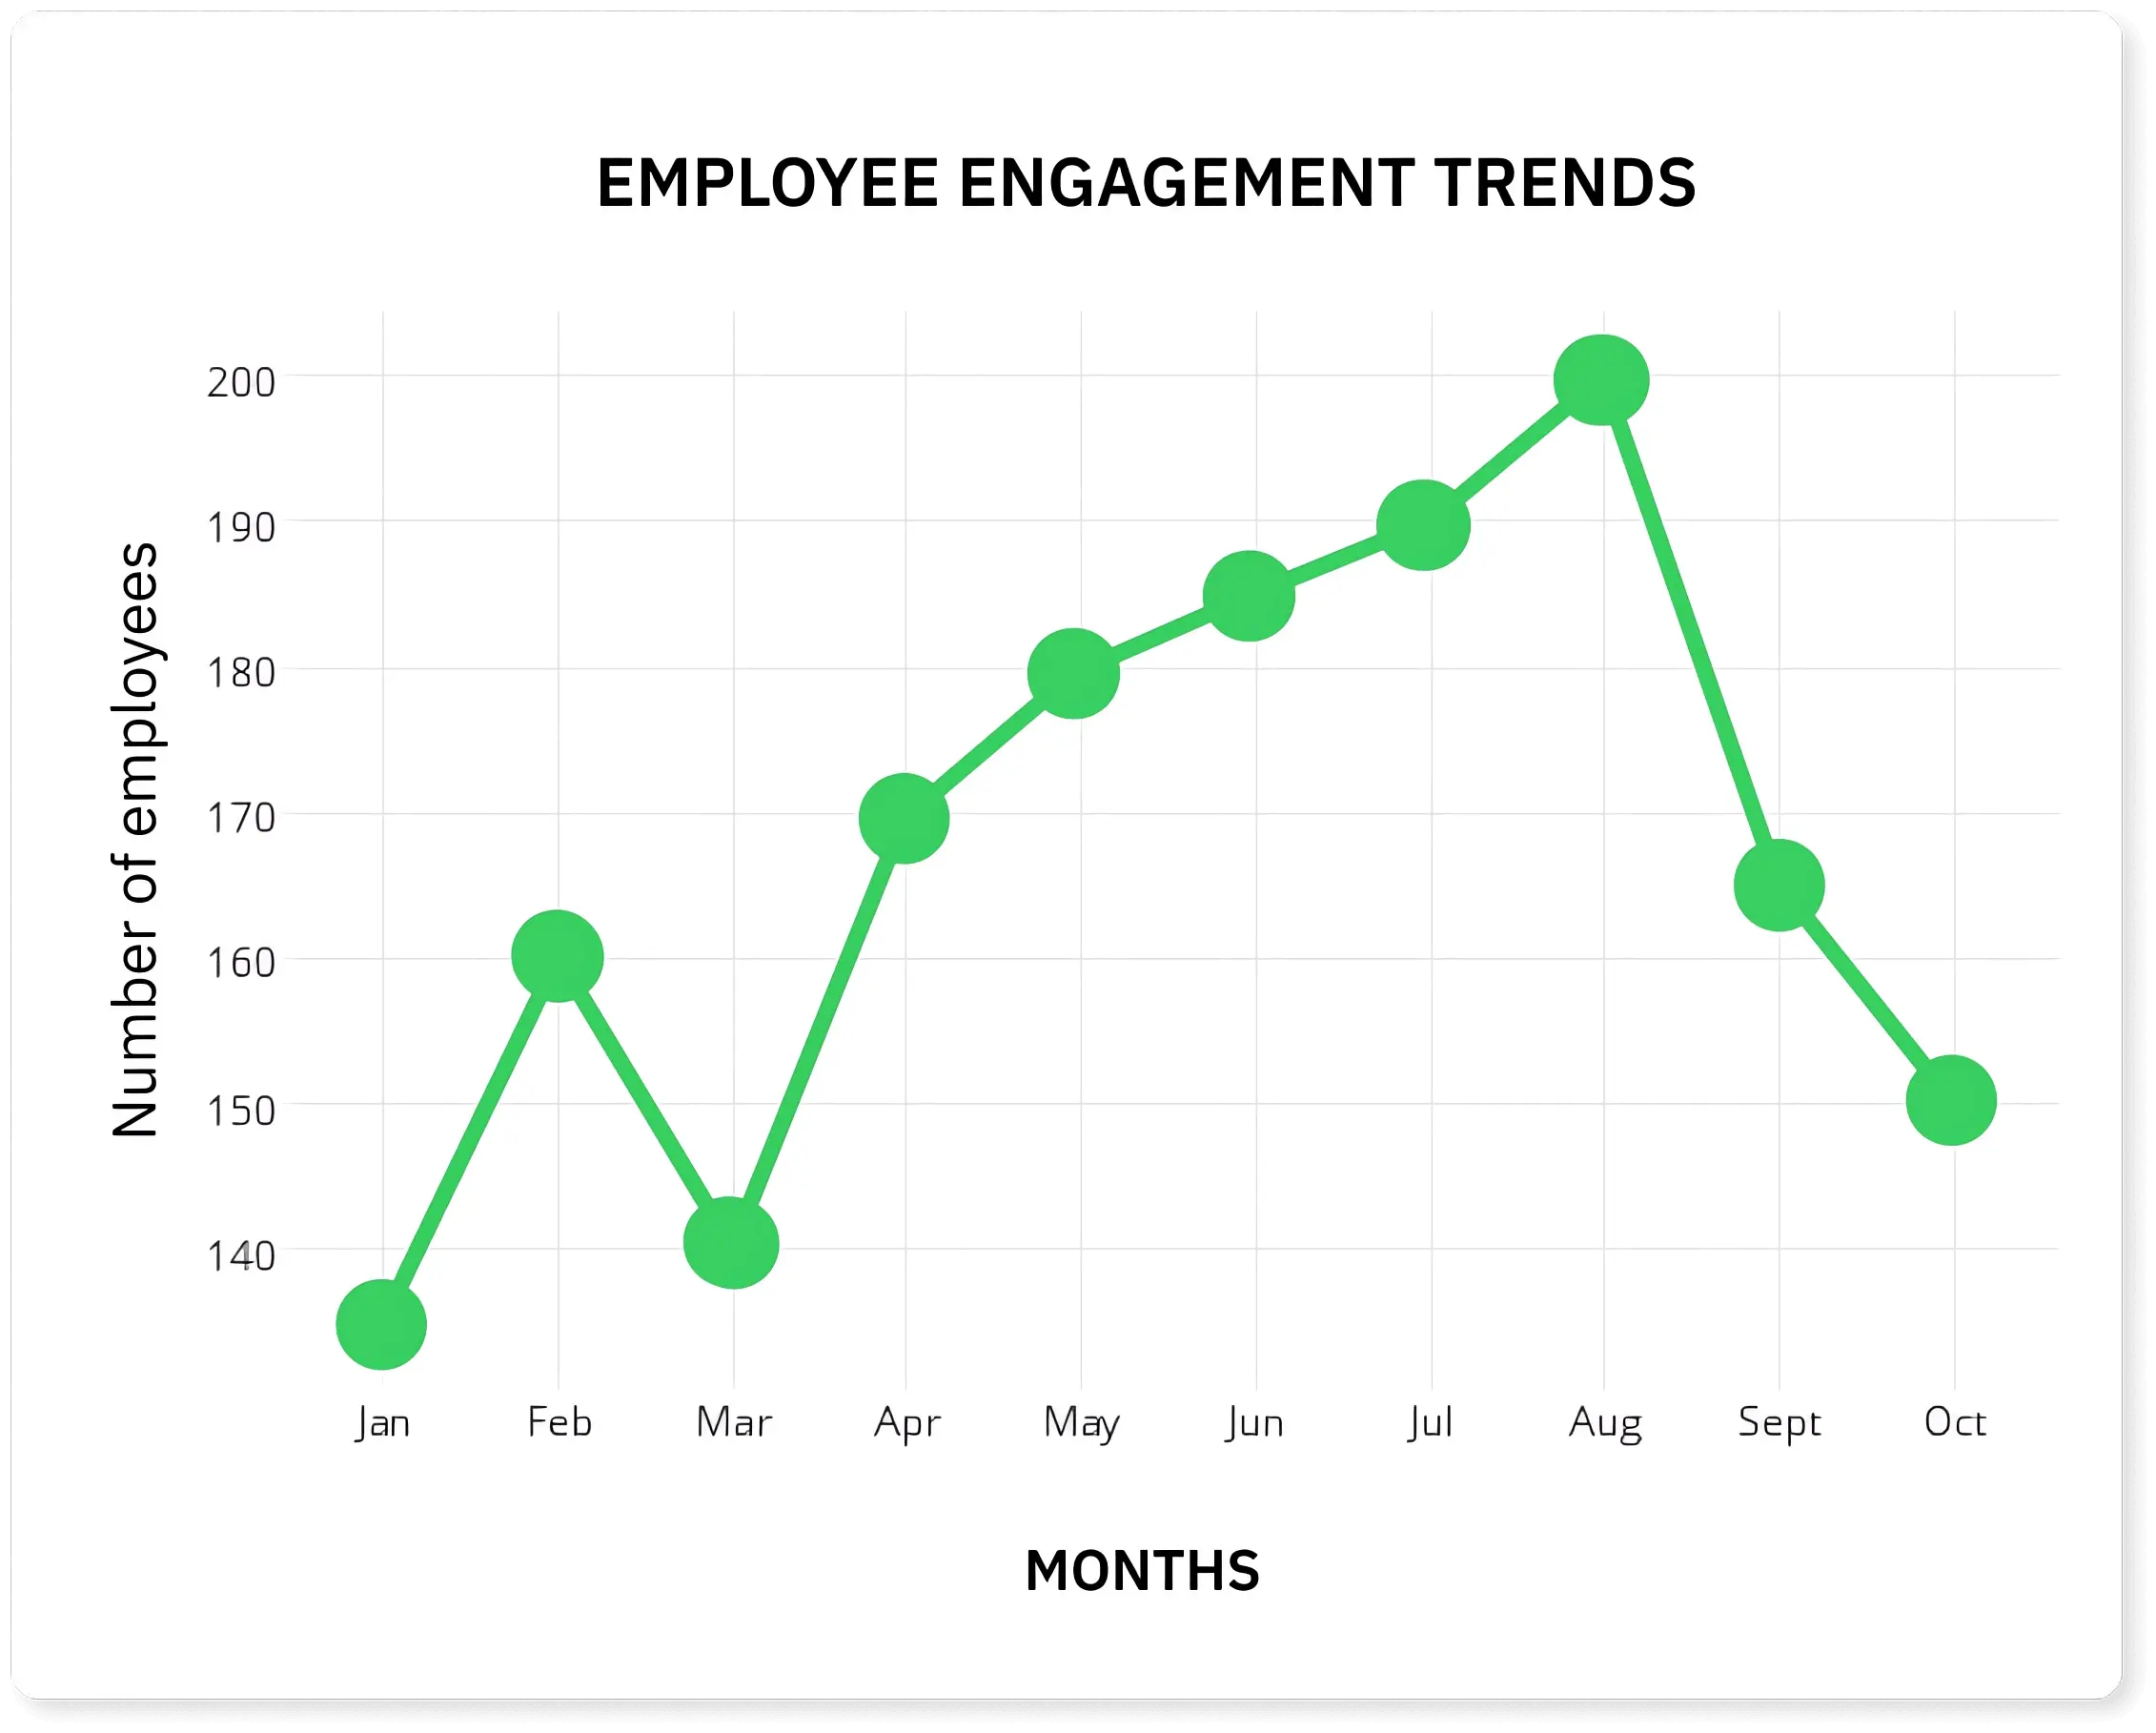 Get historic reporting of employee engagement trends in a swish